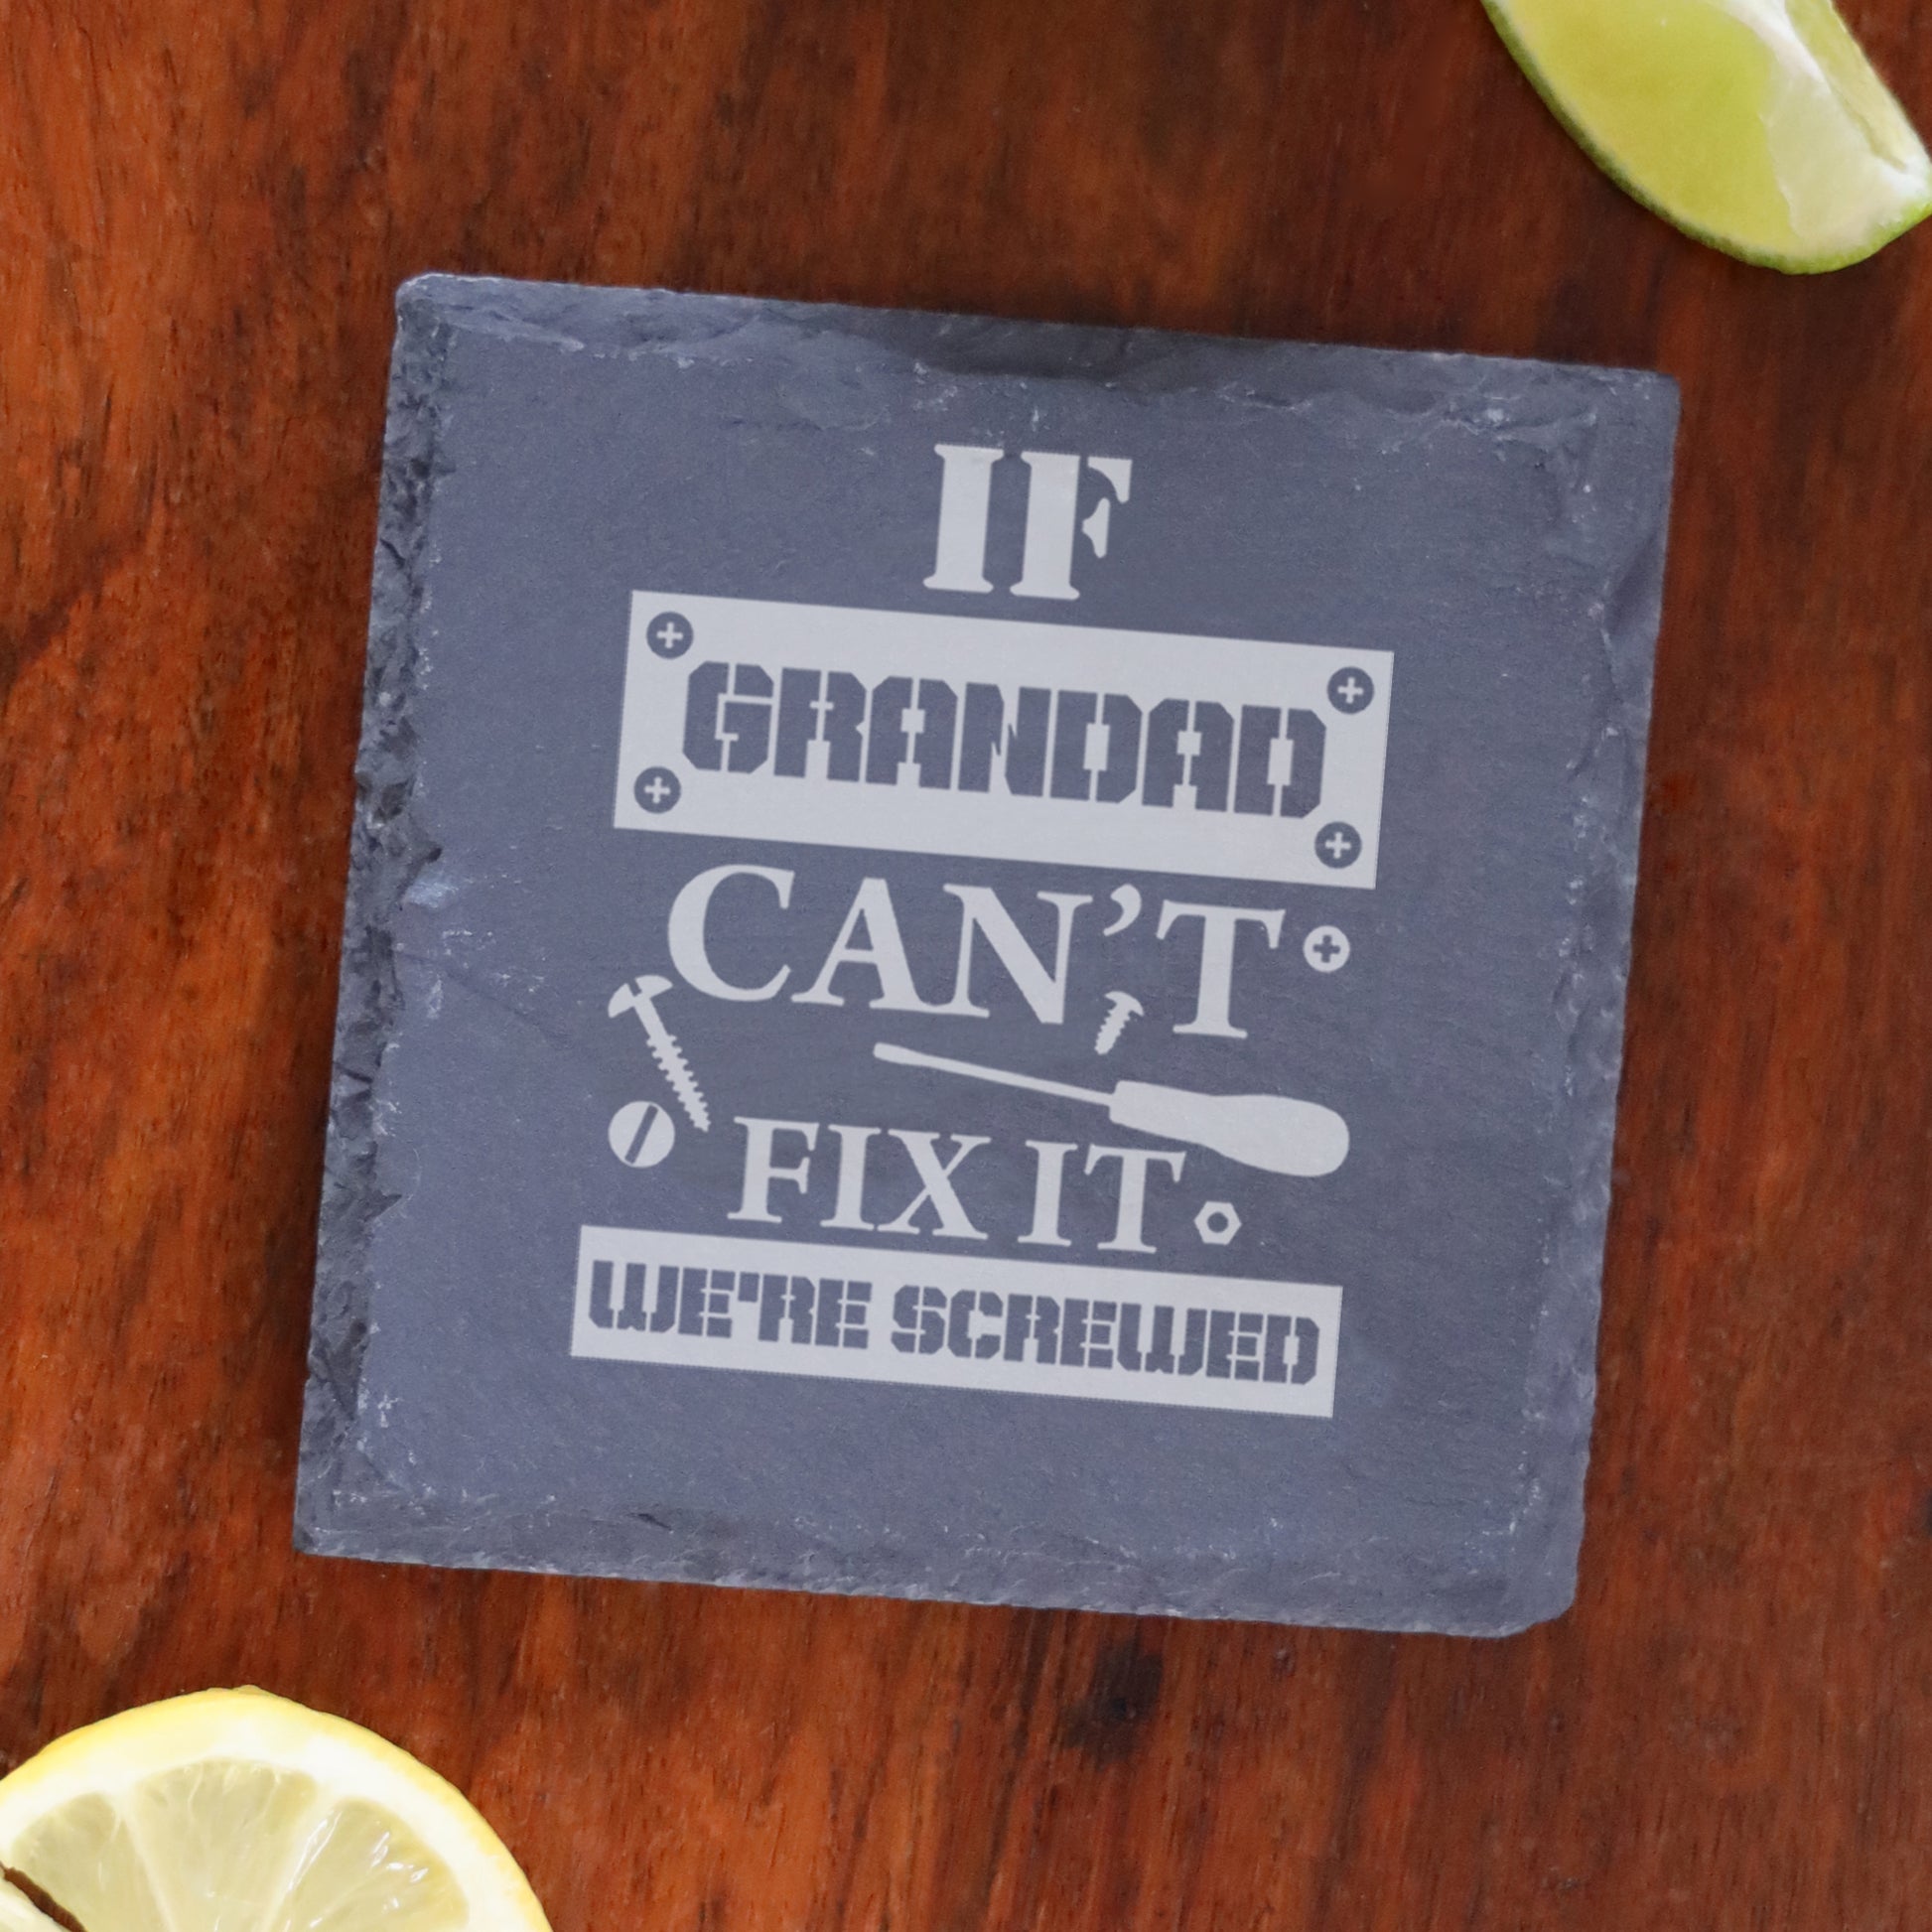 Engraved "If Grandad Can't Fix It We're Screwed " Novelty Whisky Glass and/or Coaster Set  - Always Looking Good - Square Coaster Only  